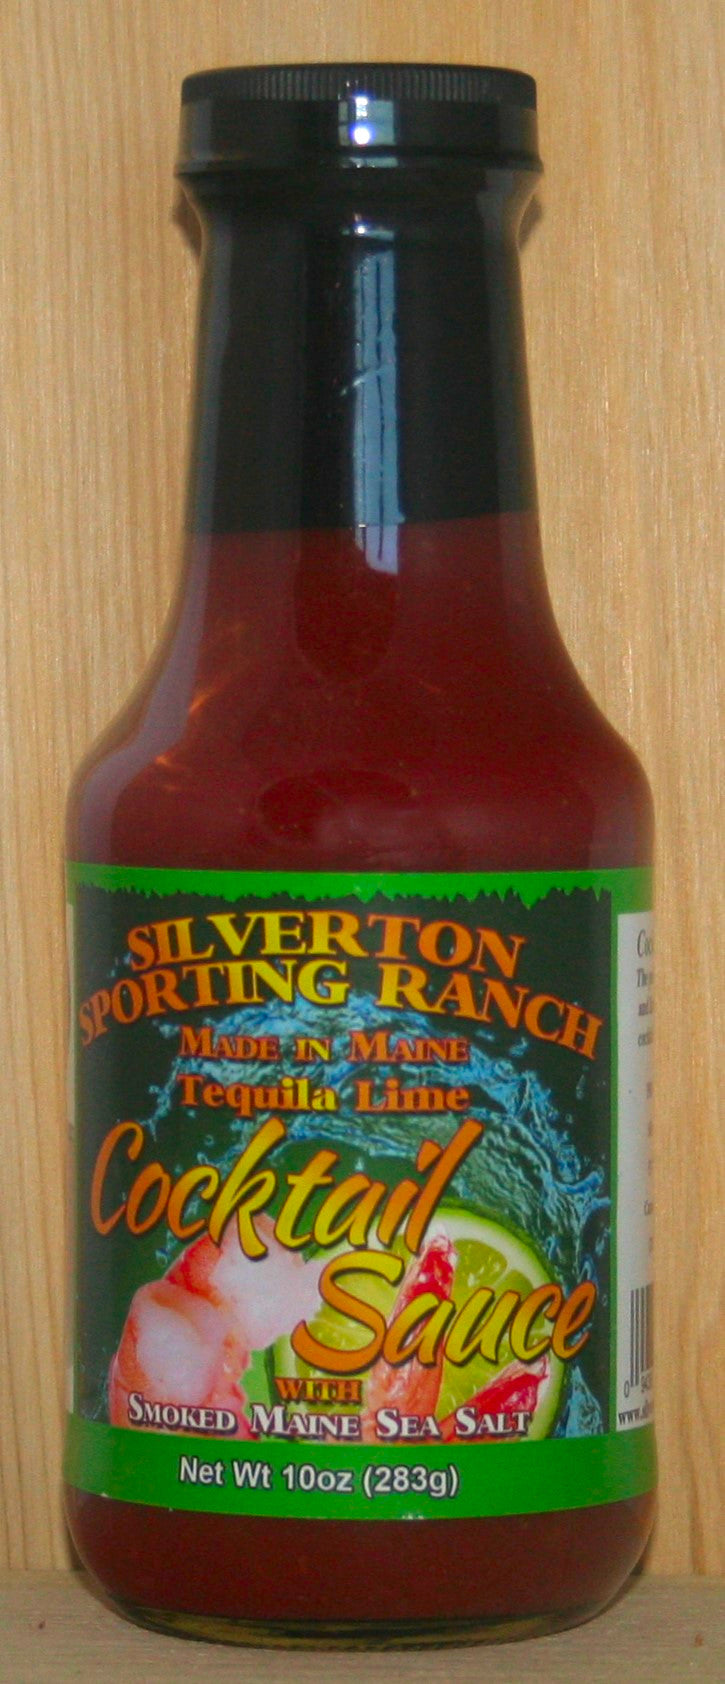 Tequila Lime Cocktail Sauce with Smoked Maine Sea Salt - Silverton Foods Best BBQ Sauces